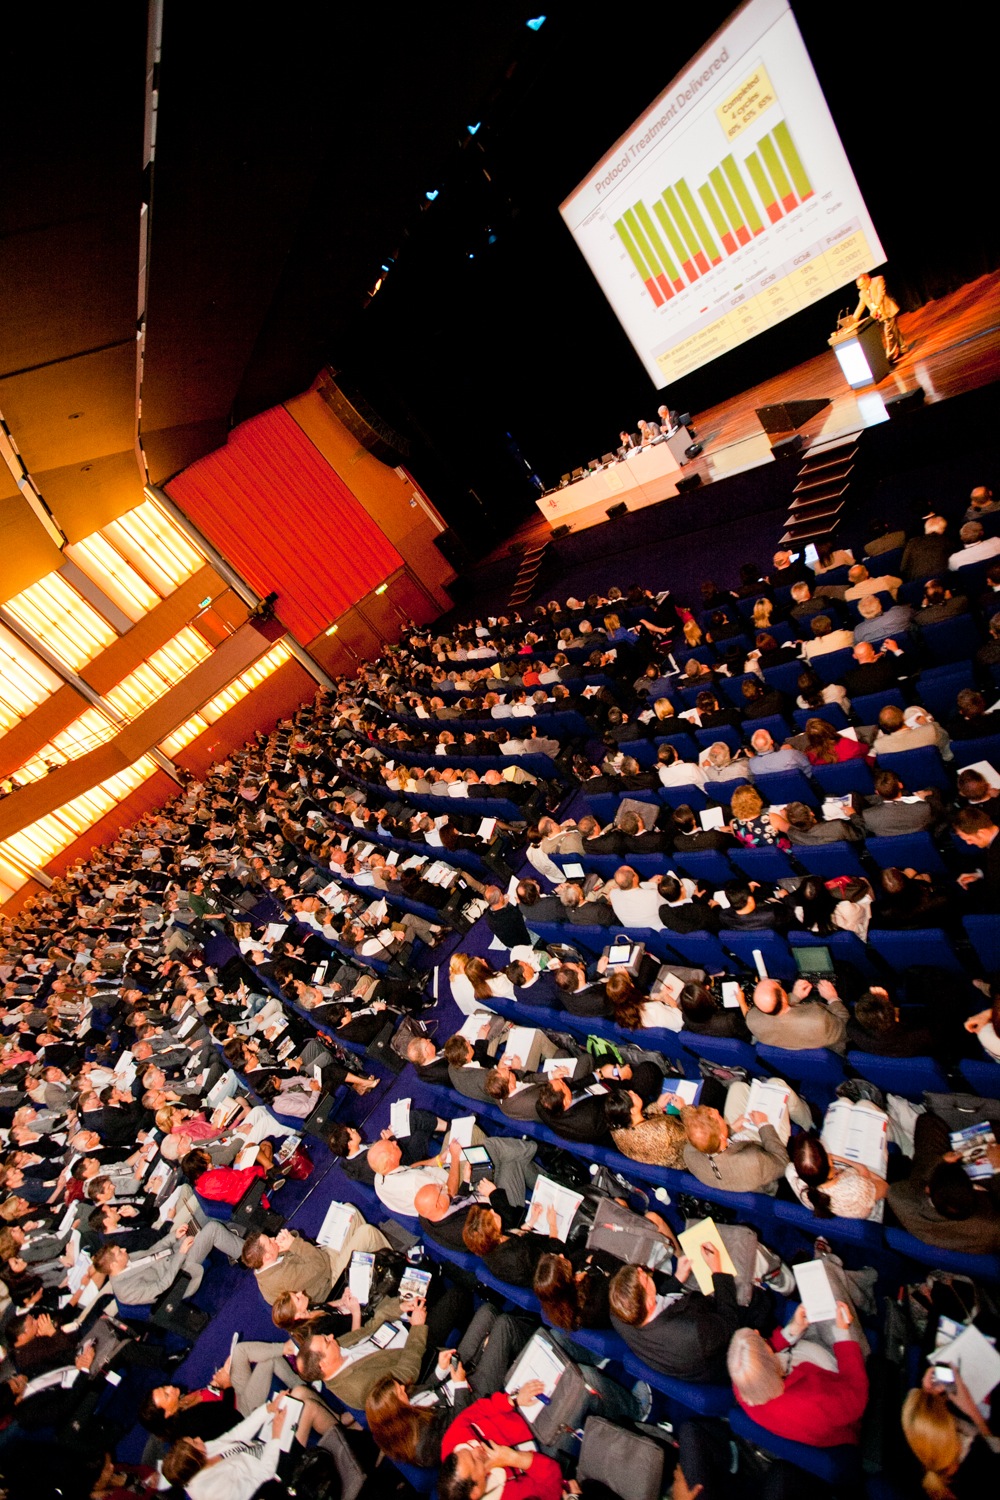 14th World Conference on Lung Cancer (July 3-7, 2011), Amsterdam, The Netherlands